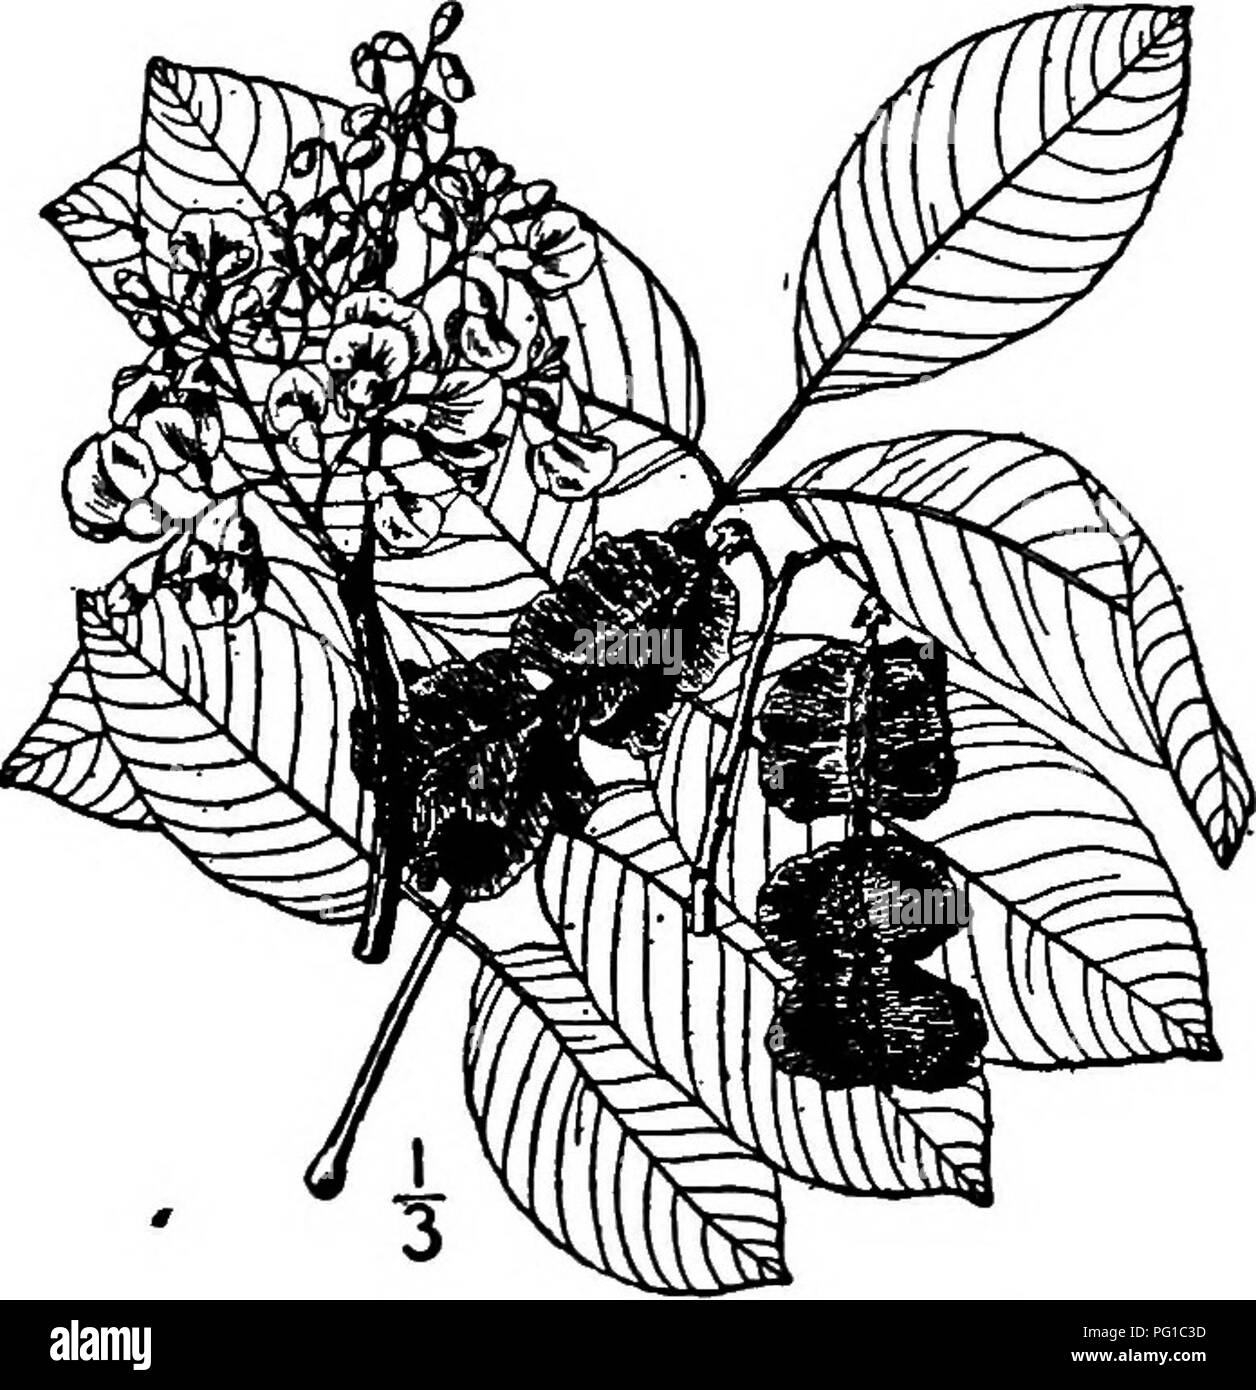 . North American trees : being descriptions and illustrations of the trees growing independently of cultivation in North America, north of Mexico and the West Indies . Trees. 560 Jamaica Dogwood as a salad or pot herb, both in the East and West Indies. The astringent bark is also used medicinally, especially in Asiatic countries. The genus consists of only this species; its name is Malabaric. VII. JAMAICA DOGWOOD GENUS ICHTHYOMETHIA PATRICK BROWNE Species Ichthyomethia Piscipula (Linnaeus) A. S. Hitchcock Erythrina Piscipula Linnaeus. Piscidia Erythrina Linnaeus AMAICA DOGWOOD is quite abundan Stock Photo